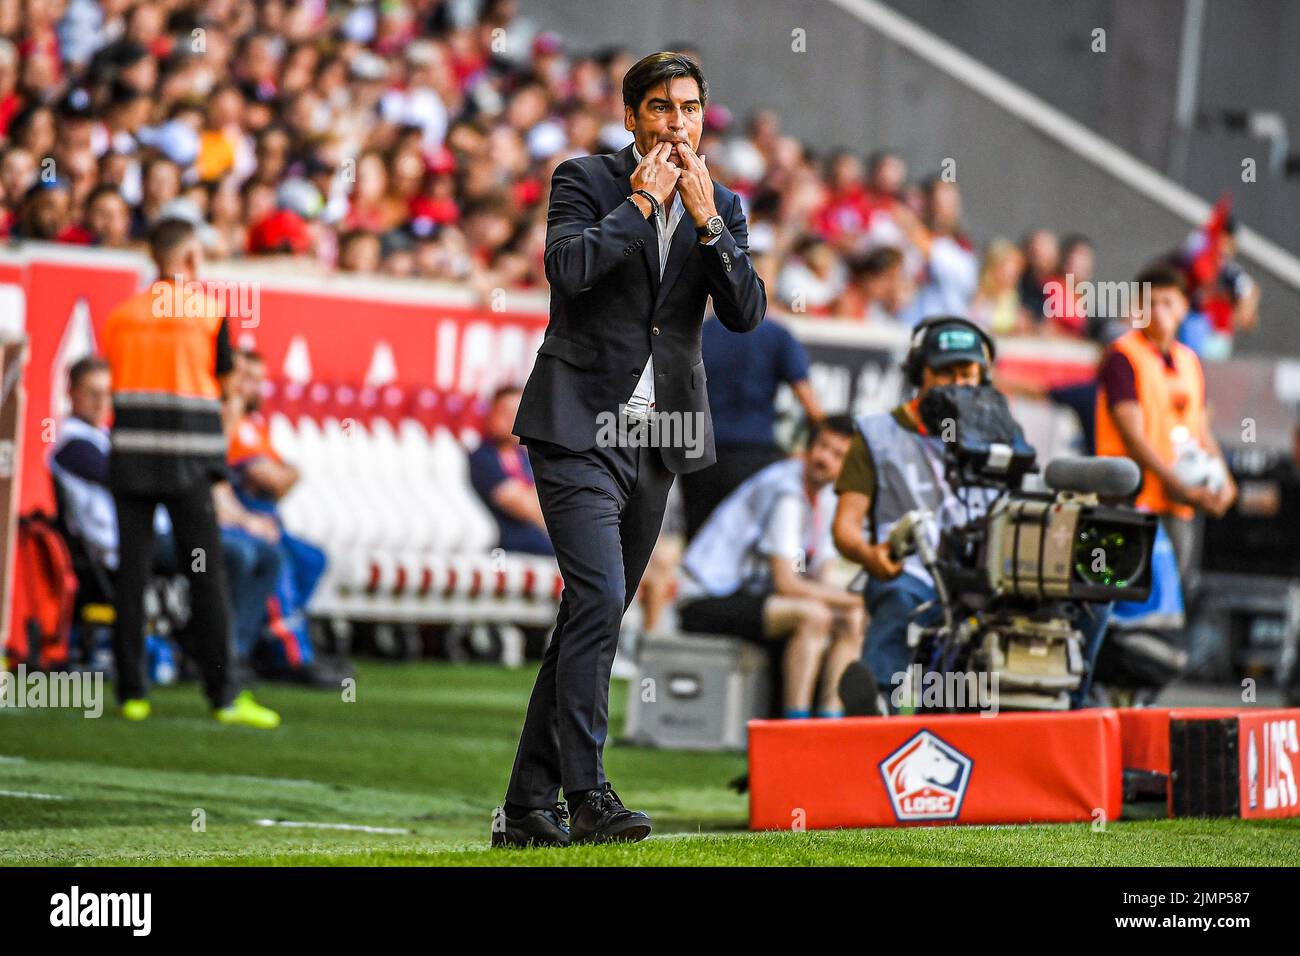 LILLE, FRANCE - AUGUST 7: head coach Paulo Fonseca of Lille during the French Ligue 1 match between Lille and Auxerre at Stade Pierre Mauroy on August 7, 2022 in Lille, France (Photo by Matthieu Mirville/Orange Pictures) Stock Photo